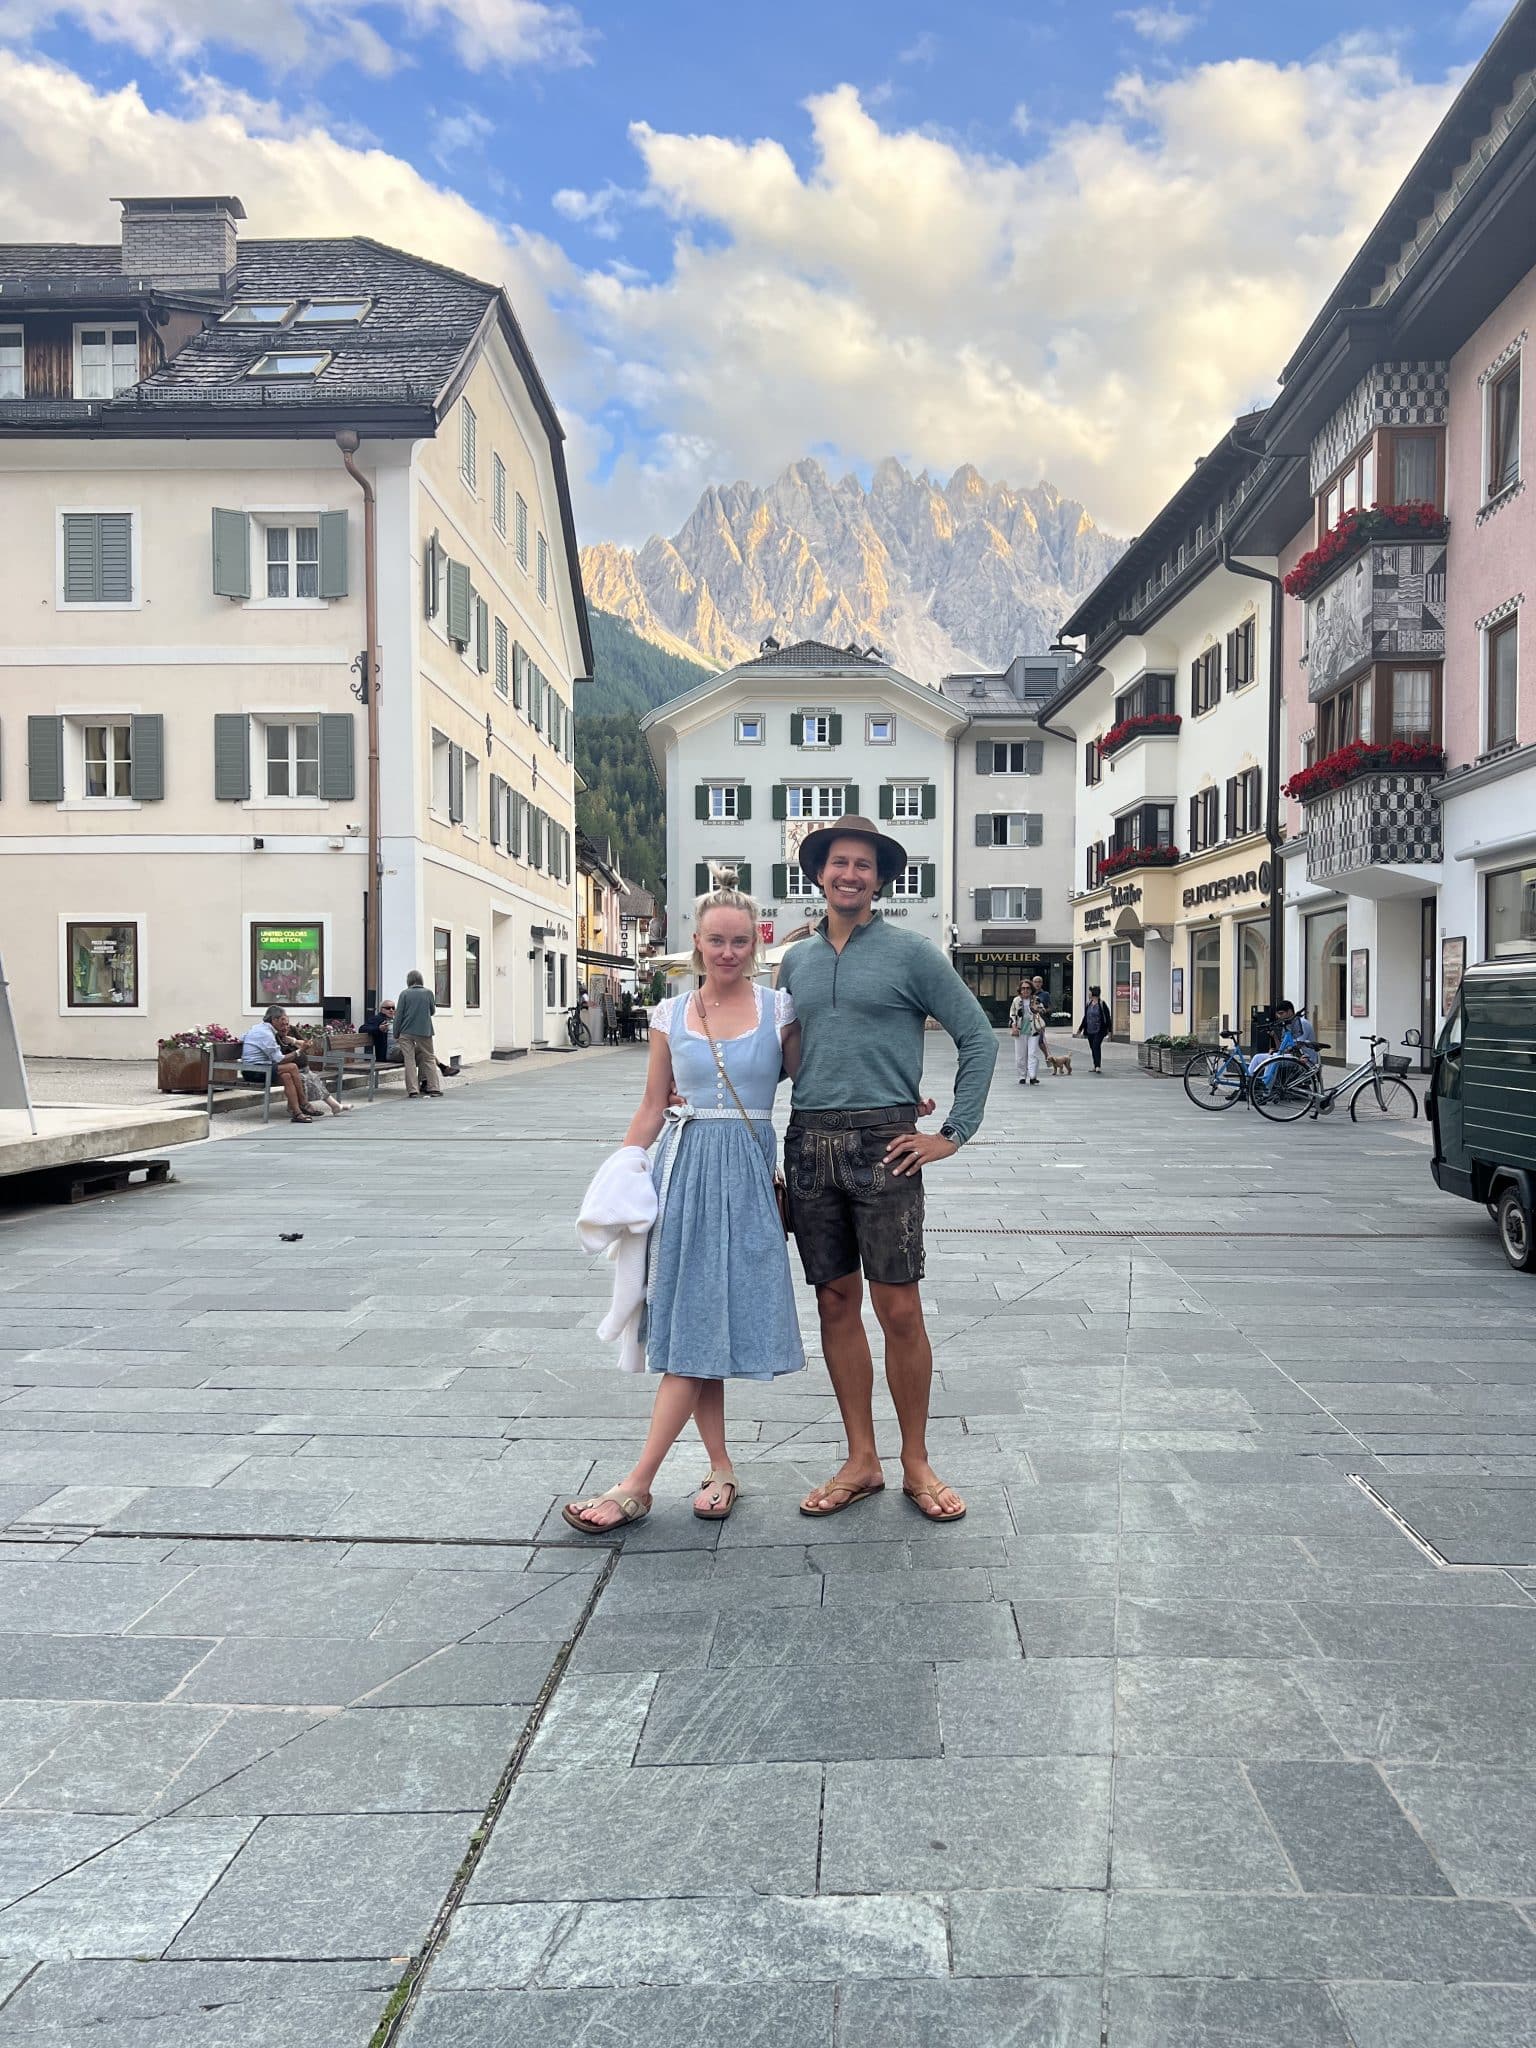 Chef Jessica and Aaron Randhawa dressed in local German clothing in central San Candido Italy with Dolomites in the background.